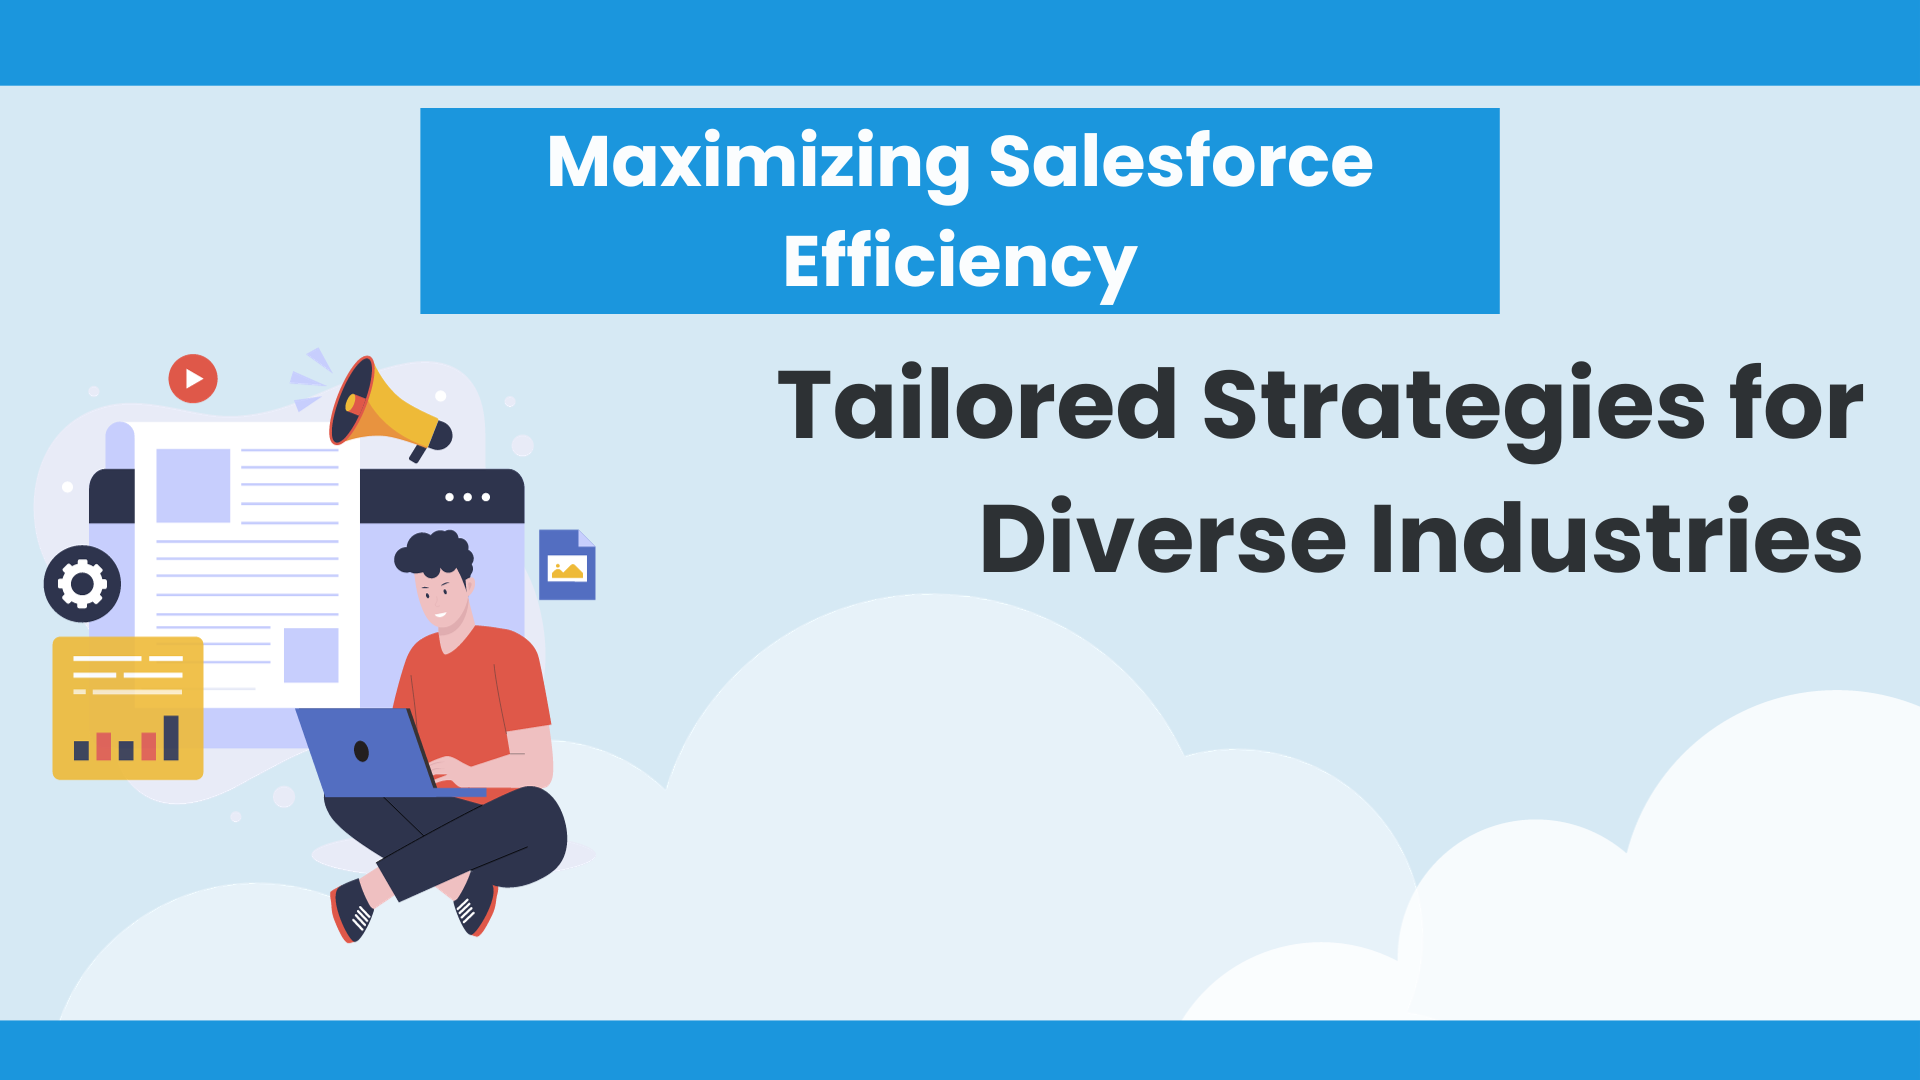 Maximizing Salesforce Efficiency: Tailored Strategies for All Industries